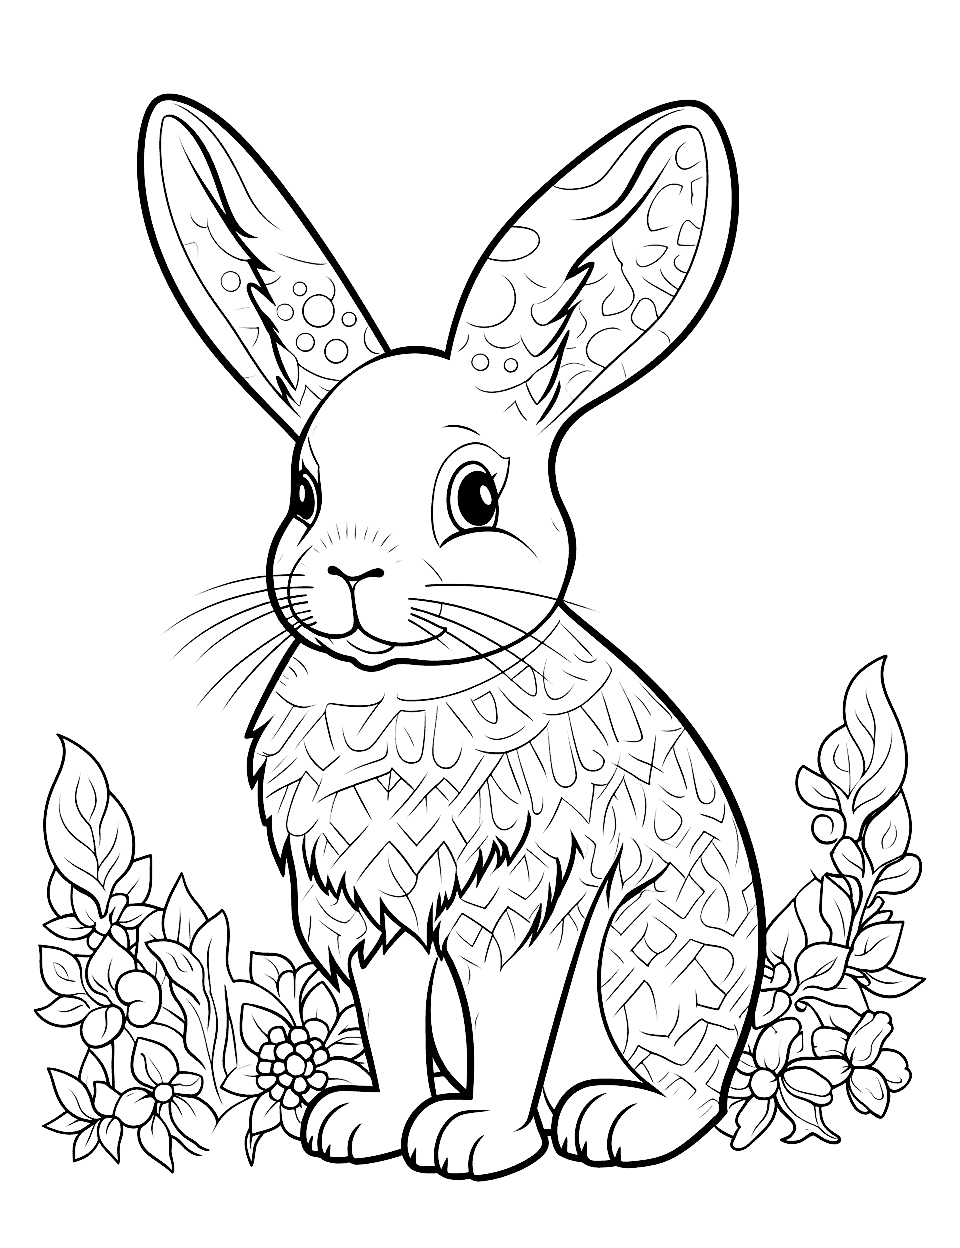 Zentangle Inspired Bunny Coloring Page - A bunny drawing using zentangle patterns for those who love intricate designs.